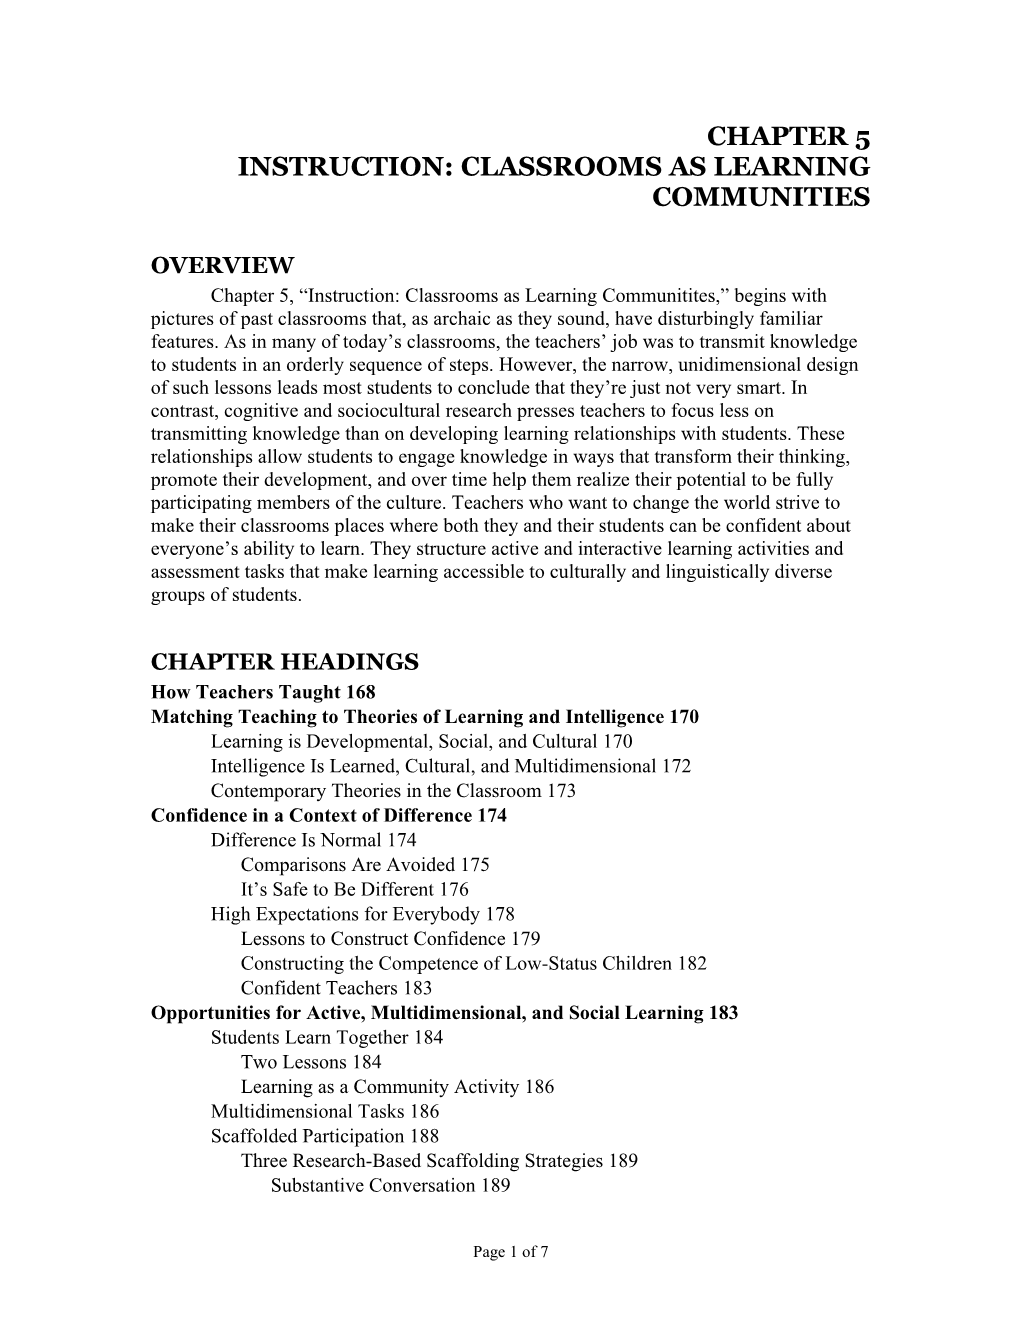 Instruction: Classrooms As Learning Communities